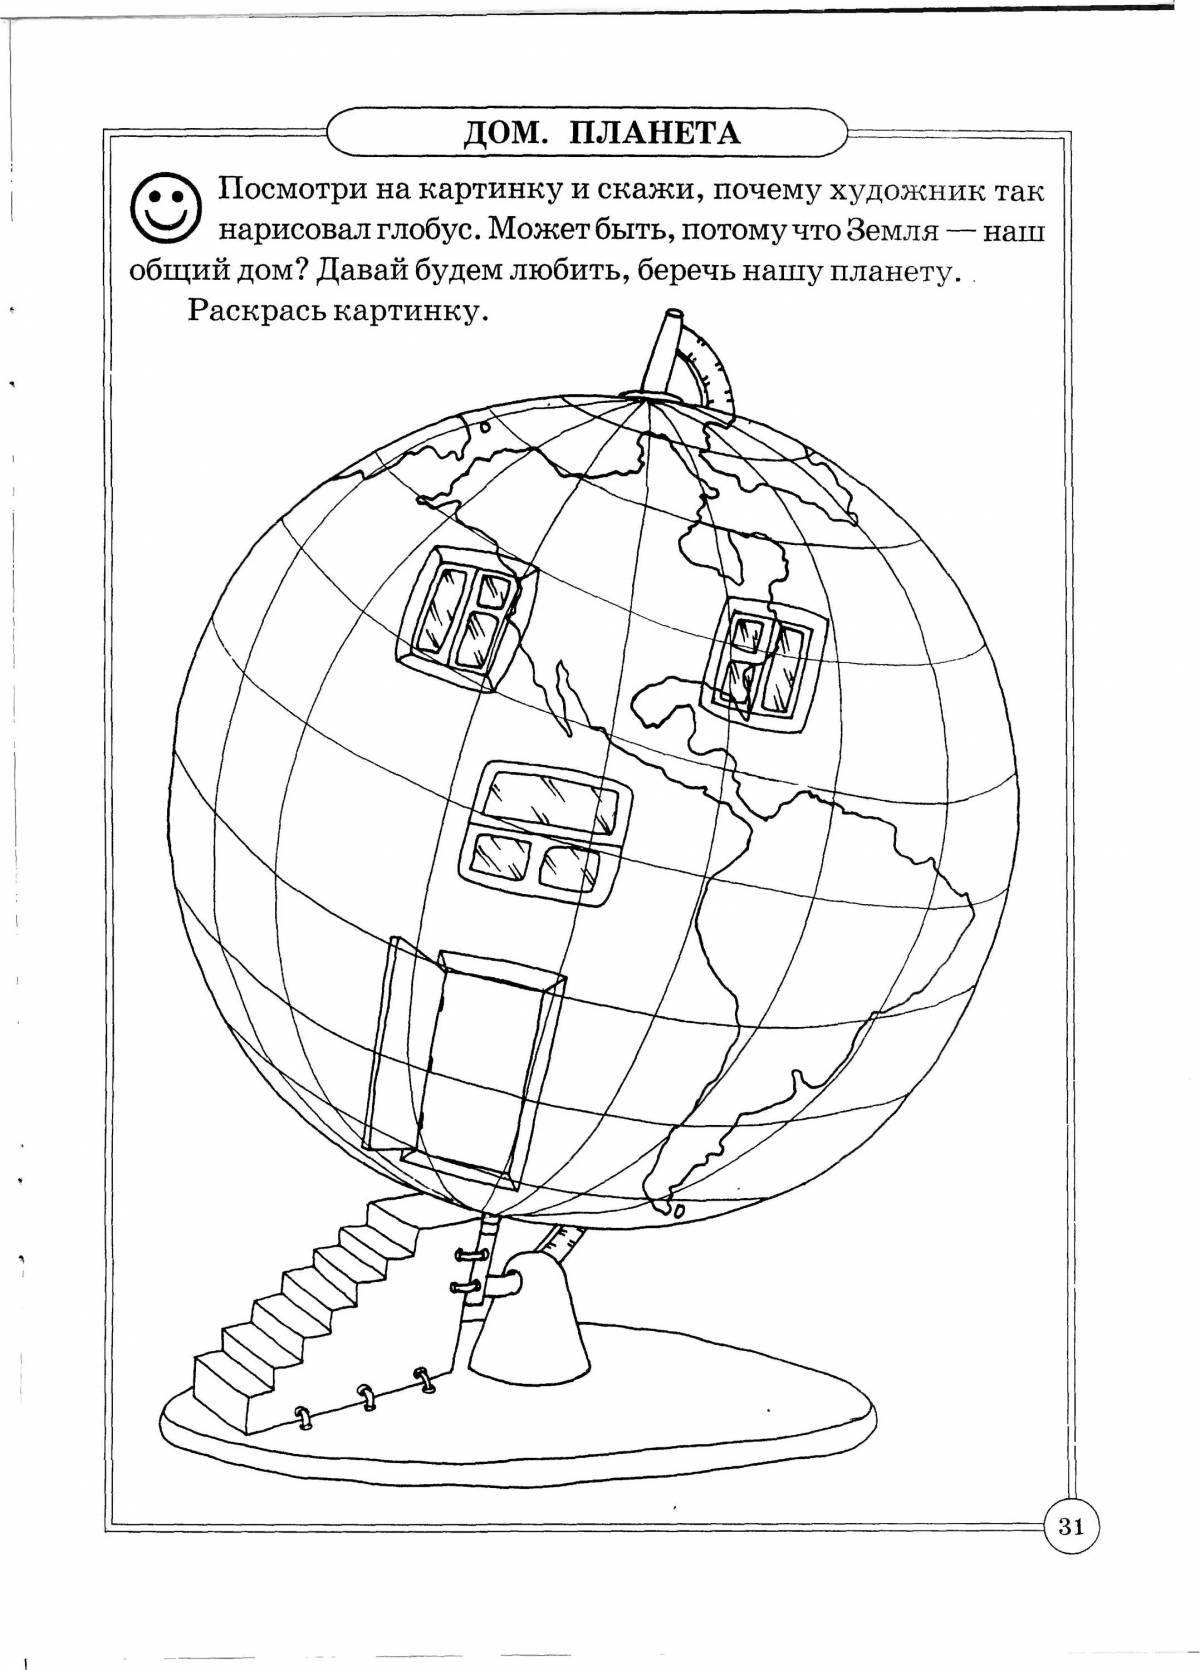 Bright geography coloring book